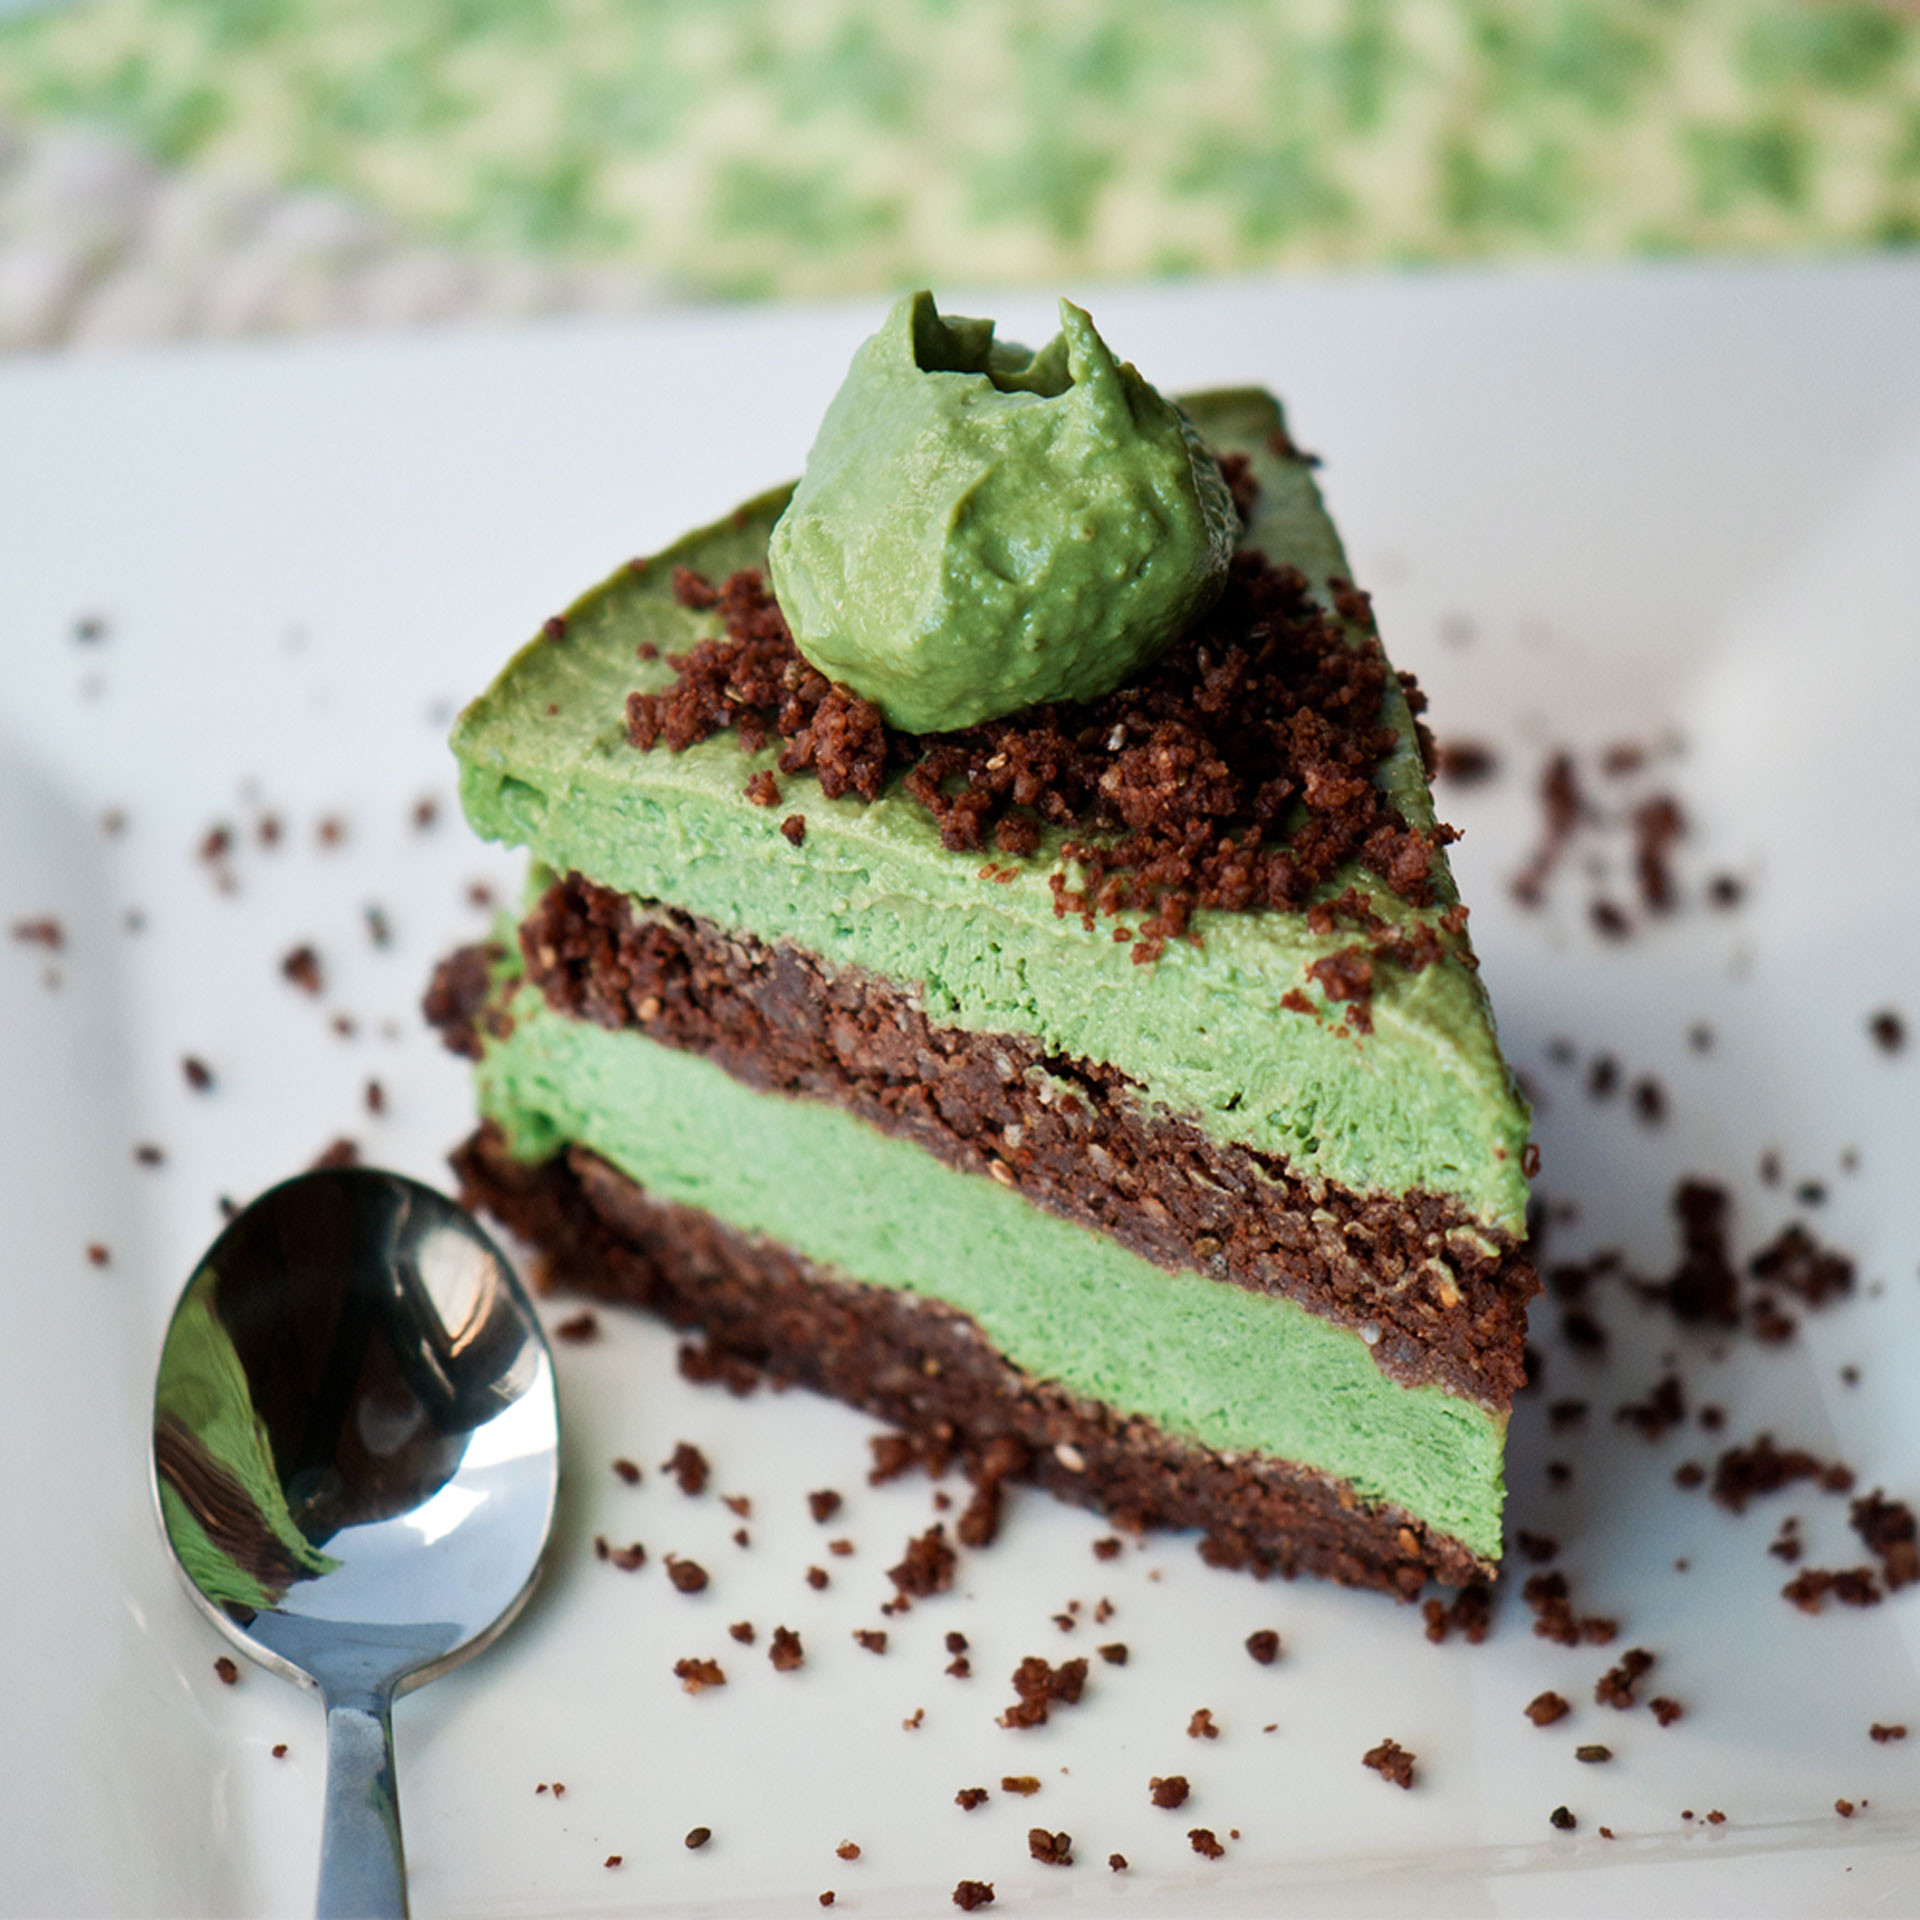 Avocado Dessert Recipes
 Avocado Dessert Recipes Healthy Desserts Made with Avocado